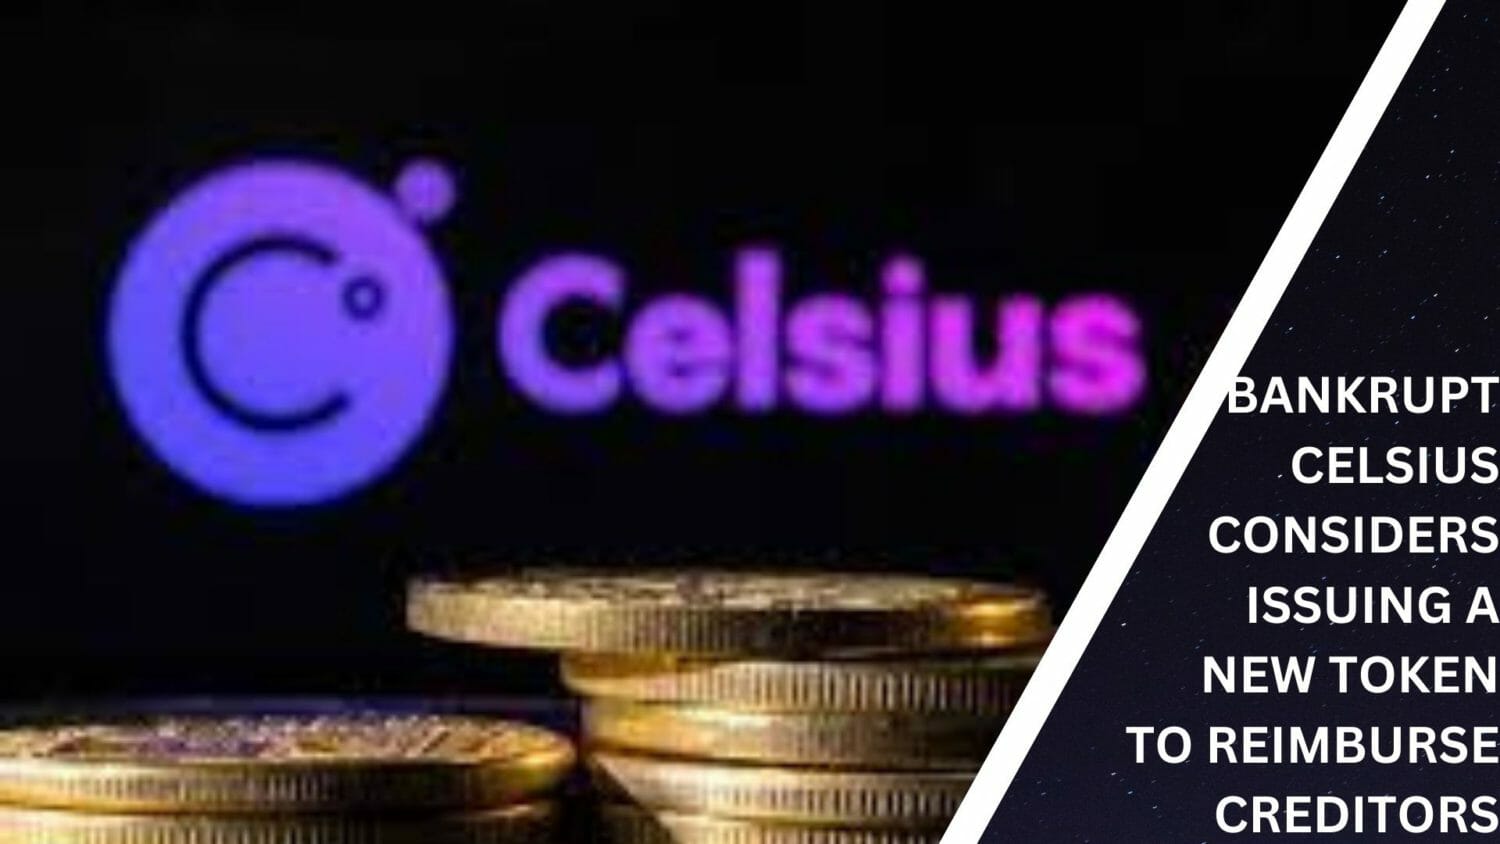 Bankrupt Celsius Considers Issuing A New Token To Reimburse Creditors